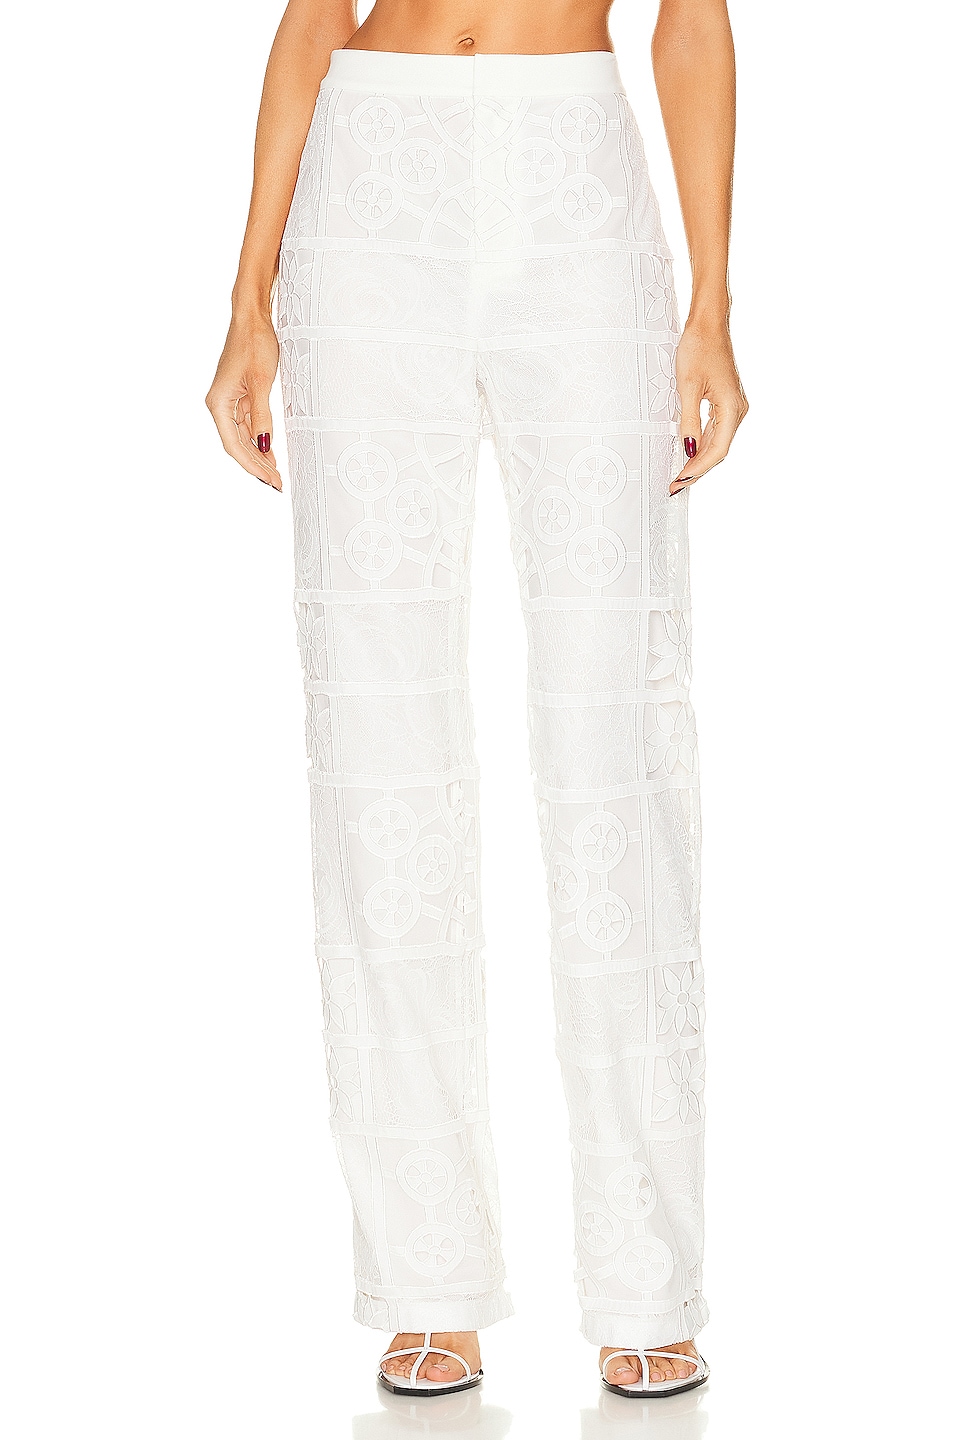 Alexis Nate Pant in White French Cut Lace | FWRD